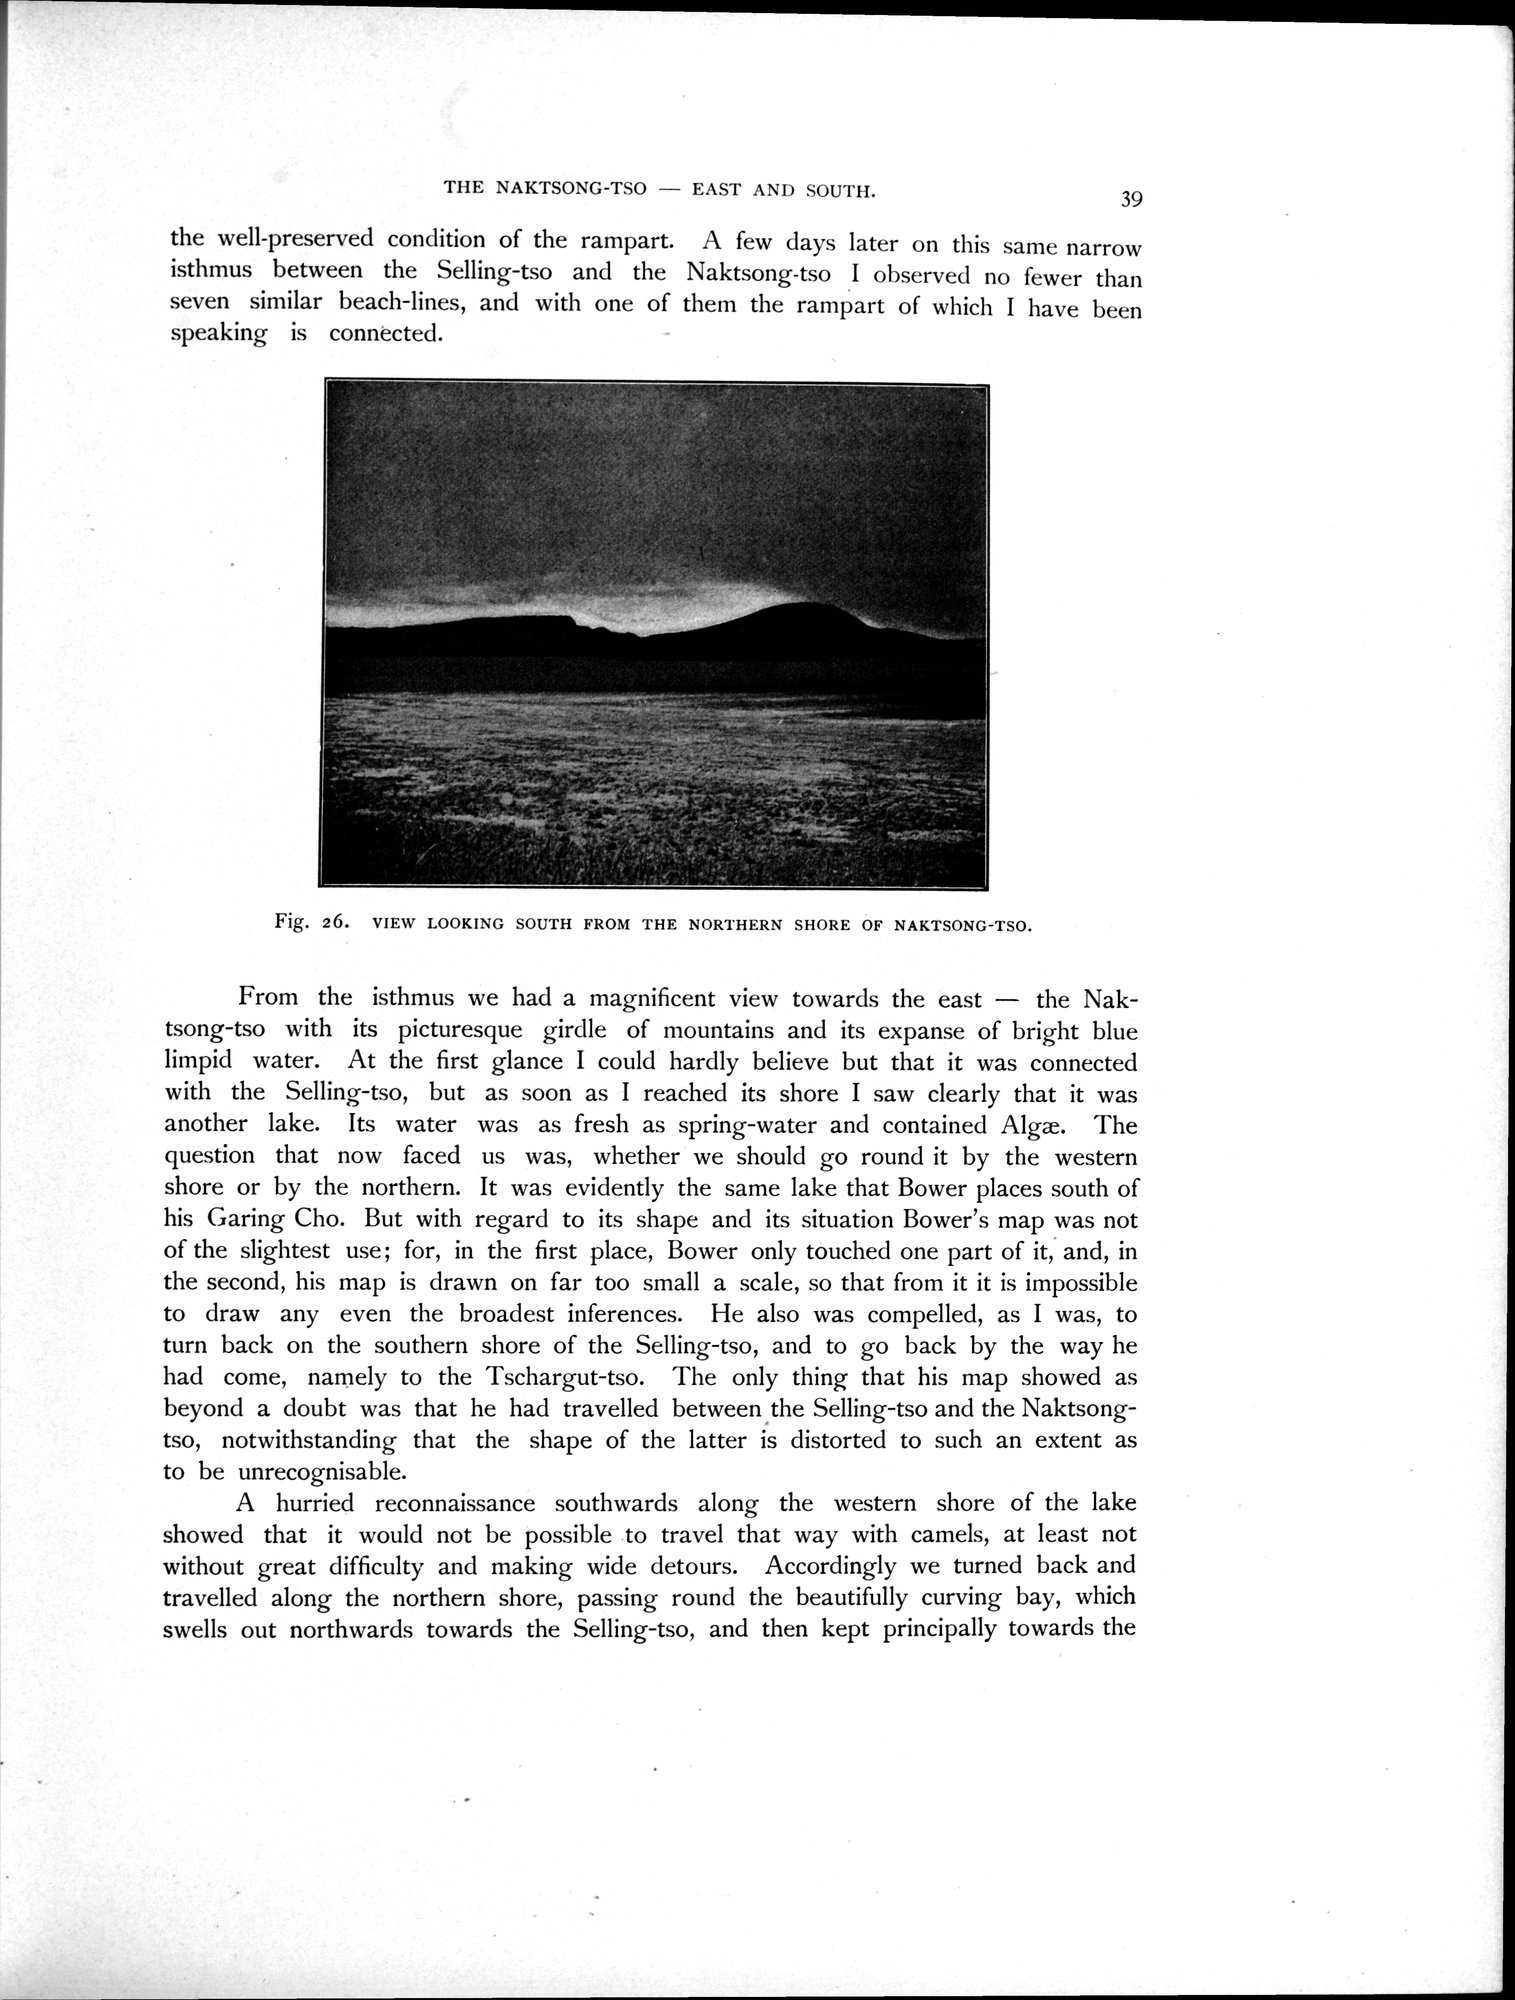 Scientific Results of a Journey in Central Asia, 1899-1902 : vol.4 / 63 ページ（白黒高解像度画像）